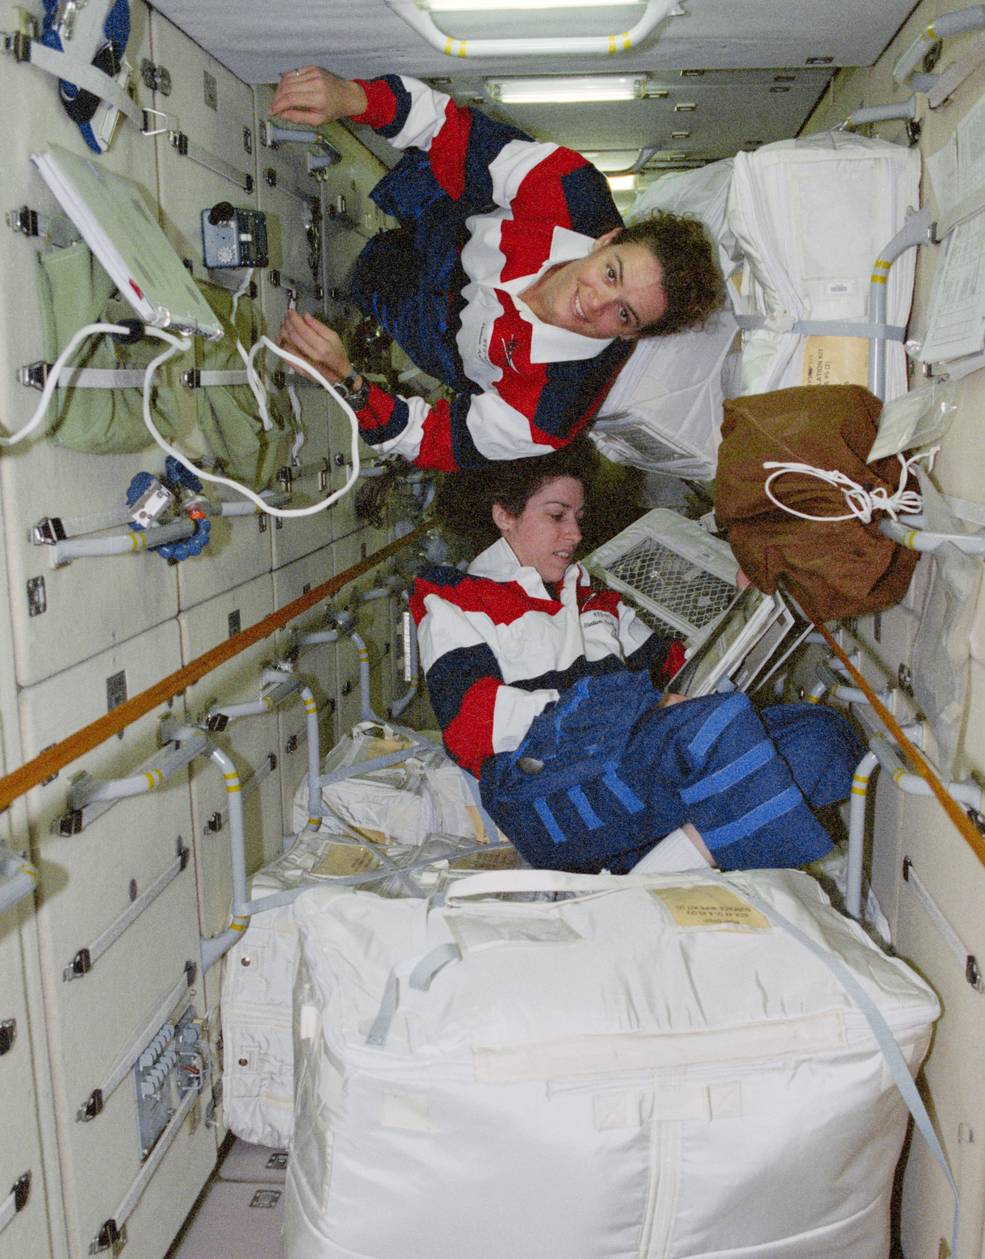 iss20_hhm_ochoa_in_fgb_w_payette_sts_96